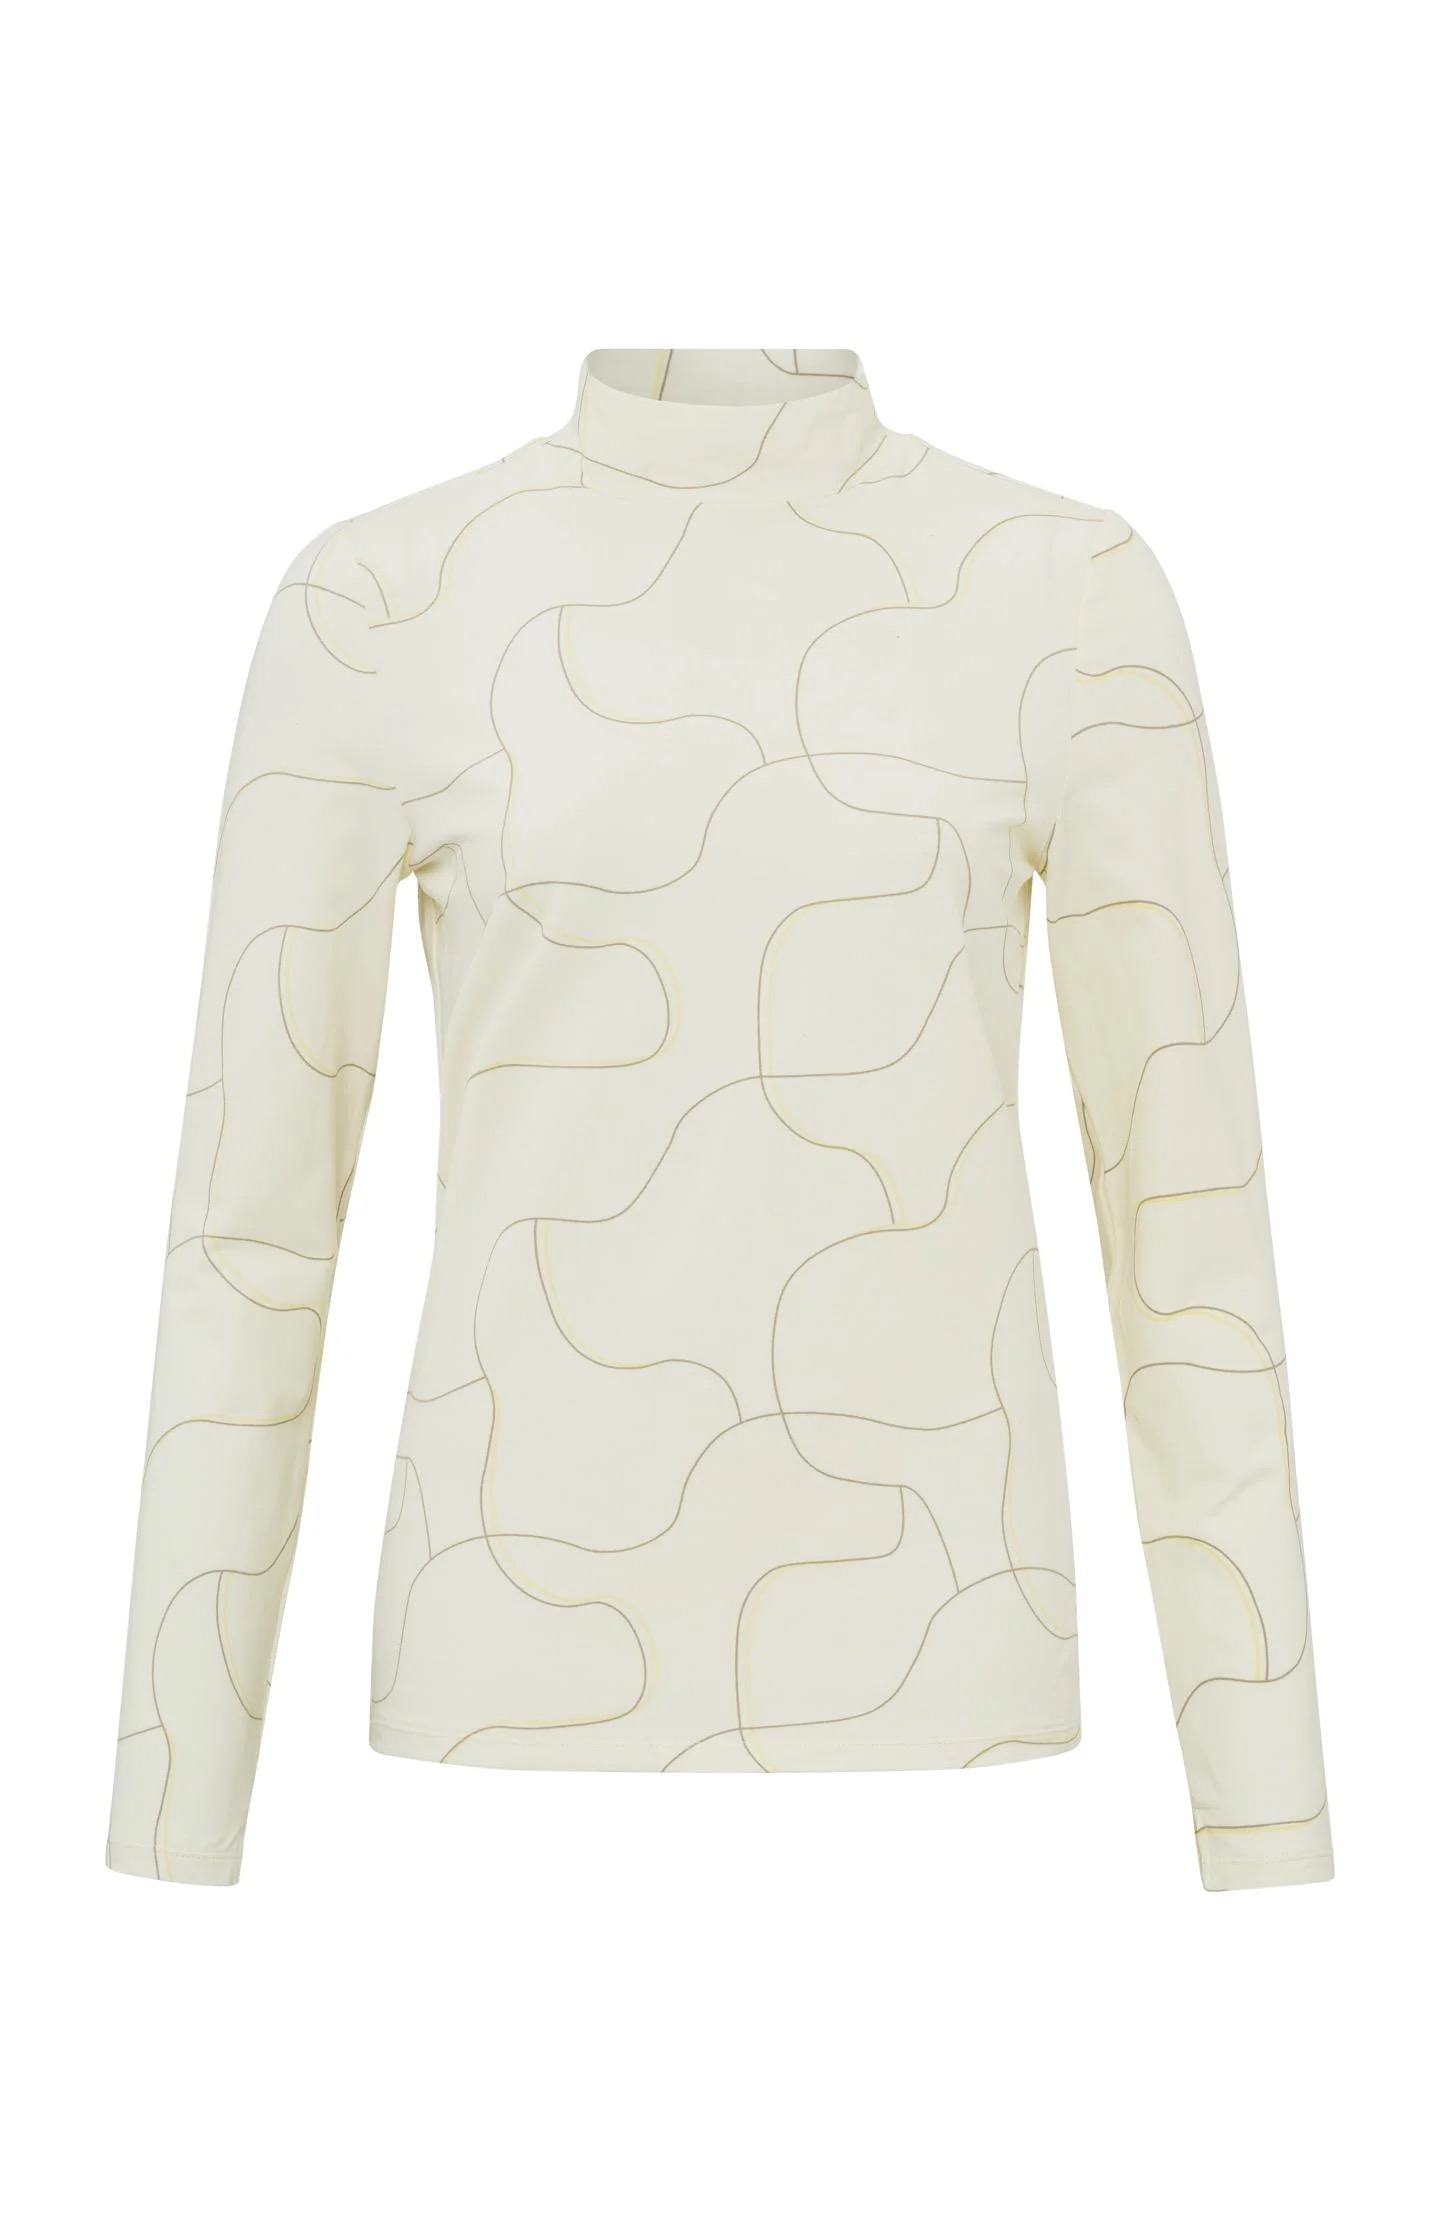 Yaya Jersey Top With Turtleneck, Long Sleeves And Playful Print - Bone White Dessin